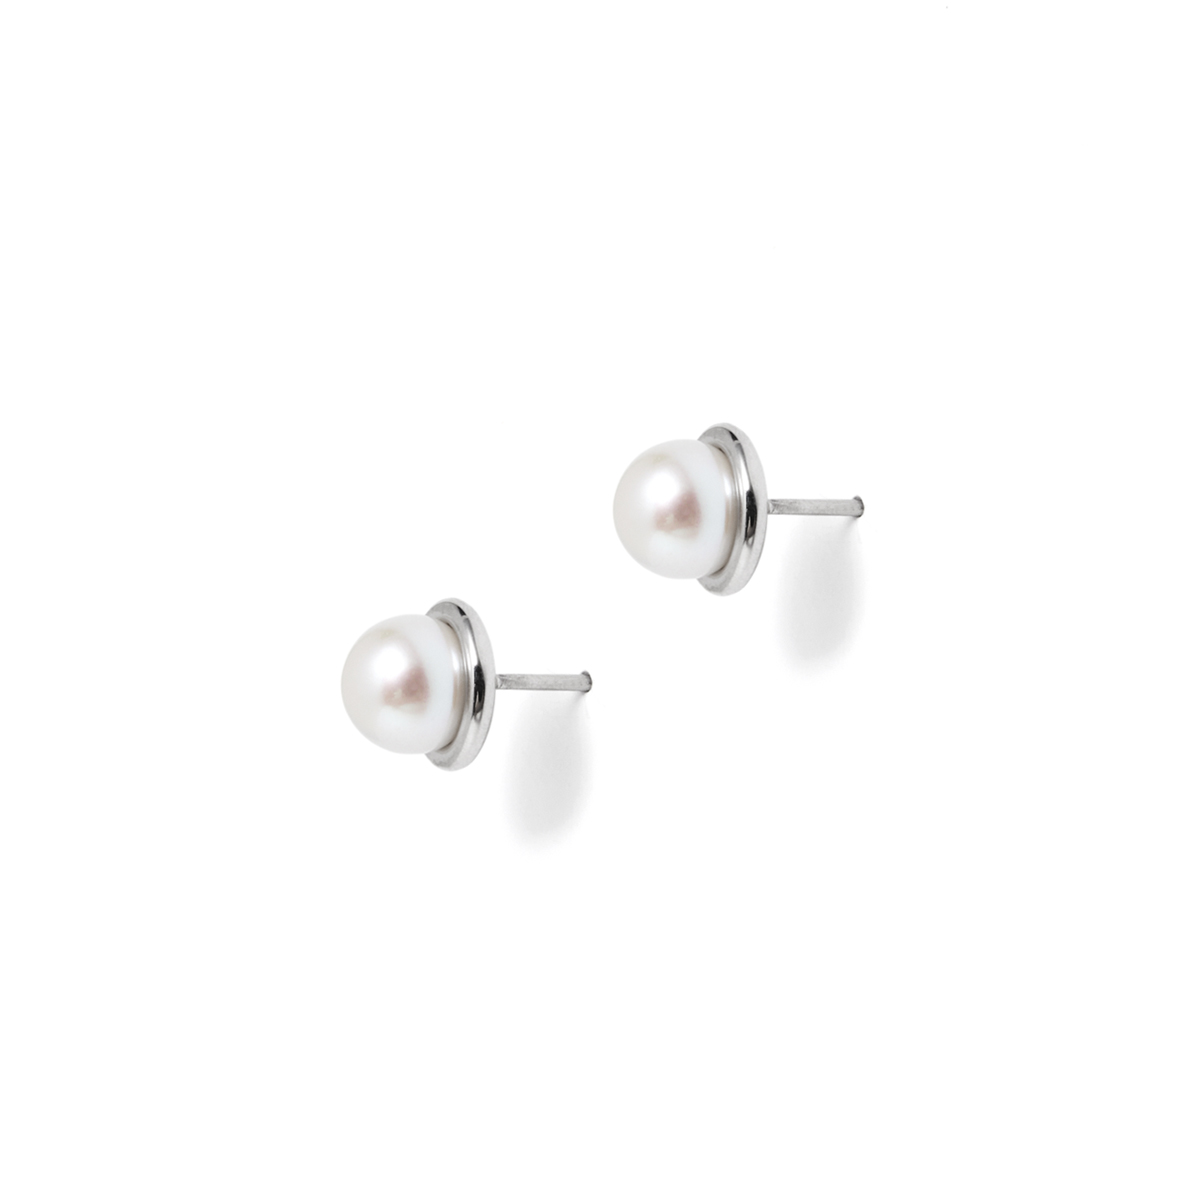 COLD WHITE 6mm PEARL EARRINGS